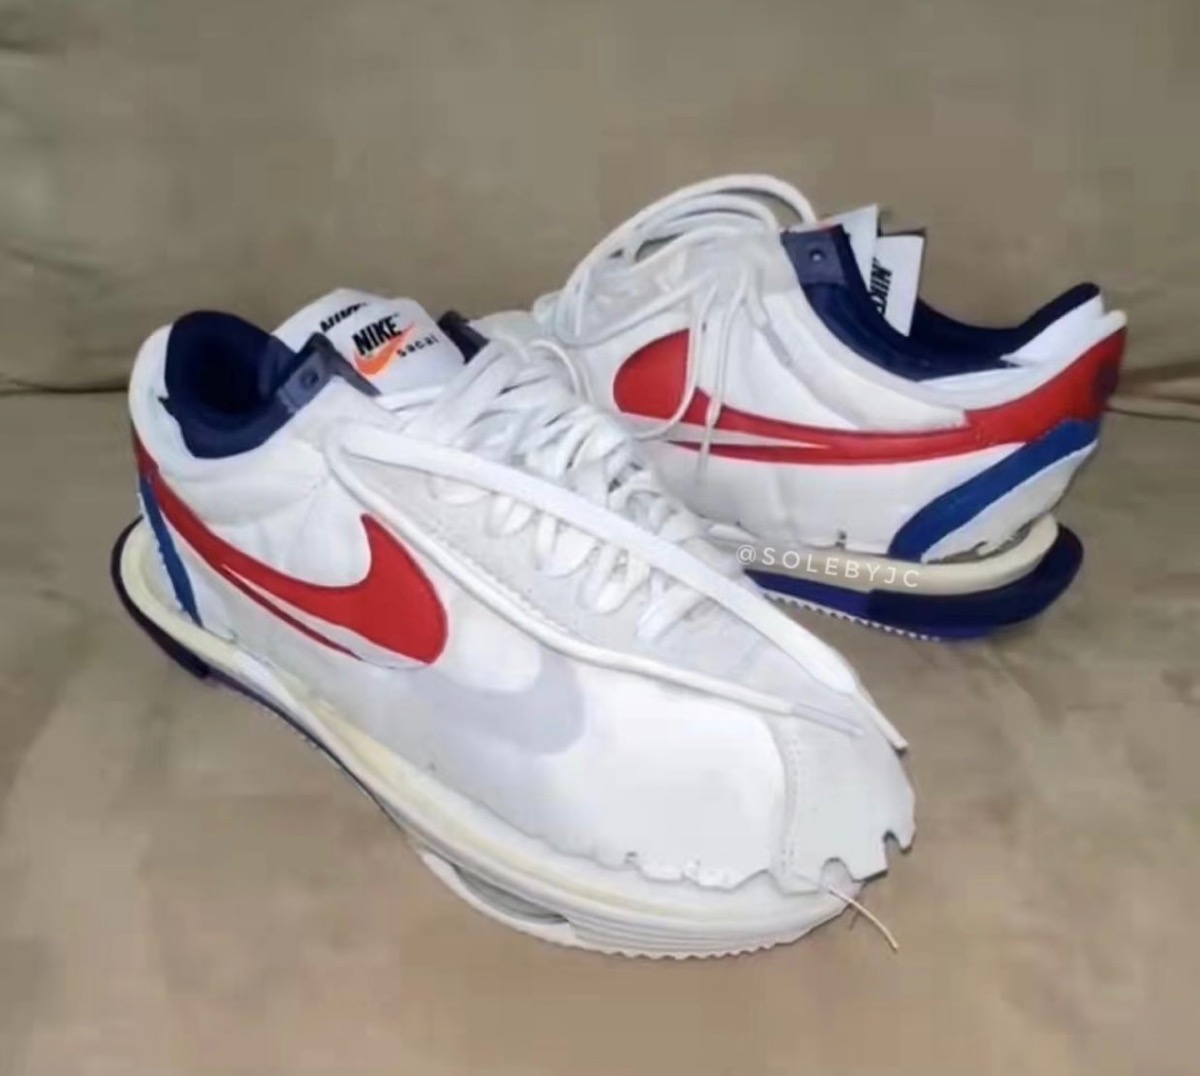 sacai × Nike『Zoom Cortez SP』が国内8月30日/8月31日より発売予定 | UP TO DATE